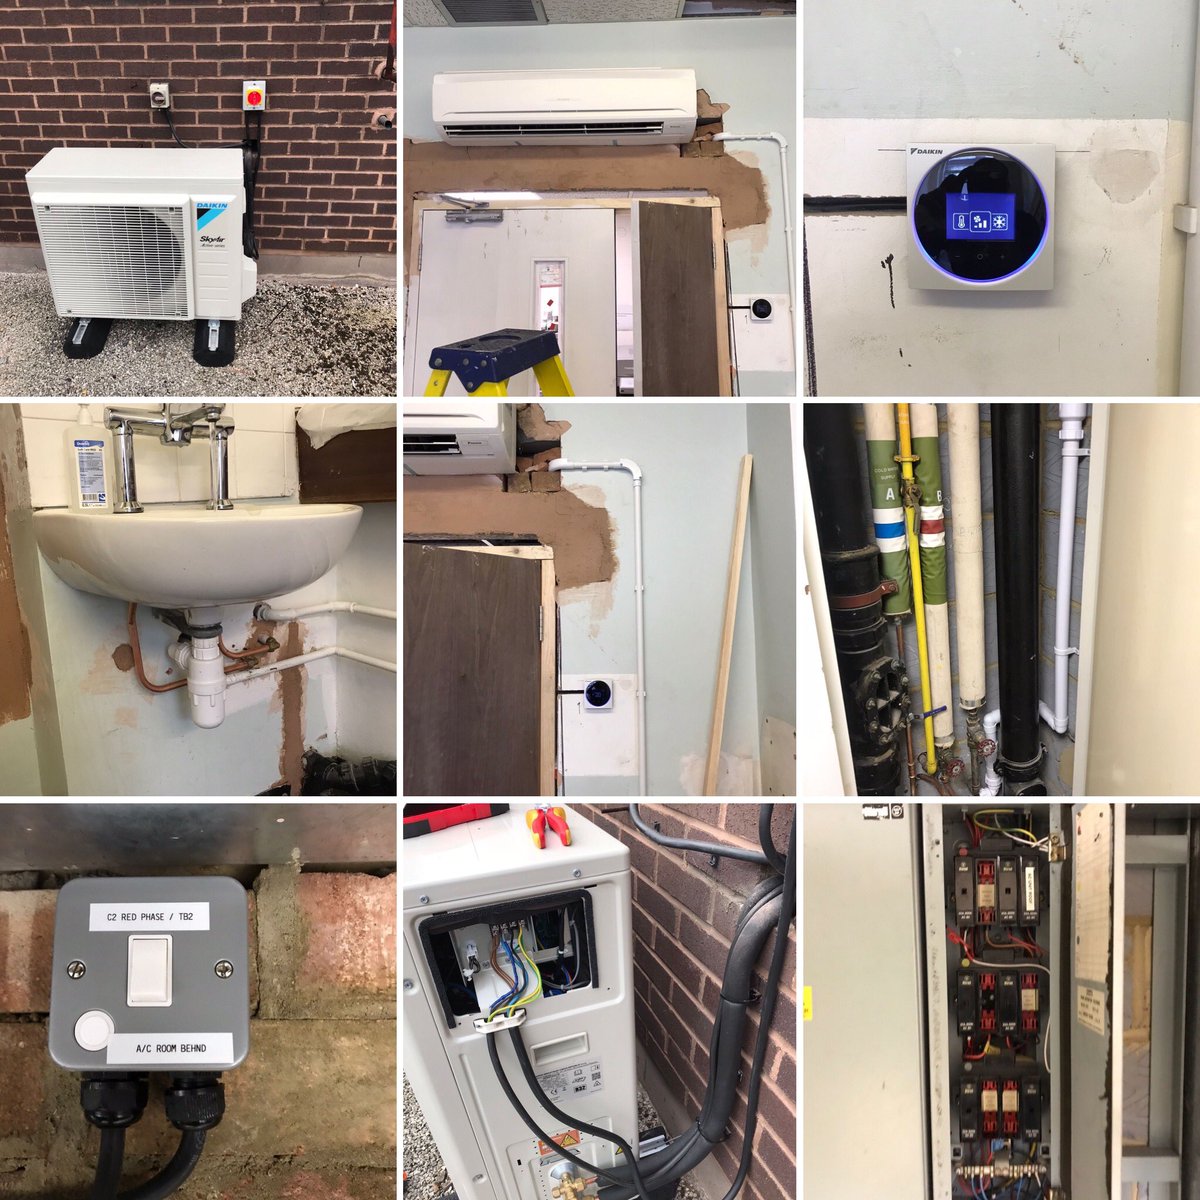 I Delta - providing air conditioning, electrical & plumbing services throughout London and surrounding areas #hvac #electricians #plumbers #airconditioning #electriciansofinstagram #plumbersofinstagram #airconditioningcontractor #aphc #daikin #daikinairconditioning #daikineurope